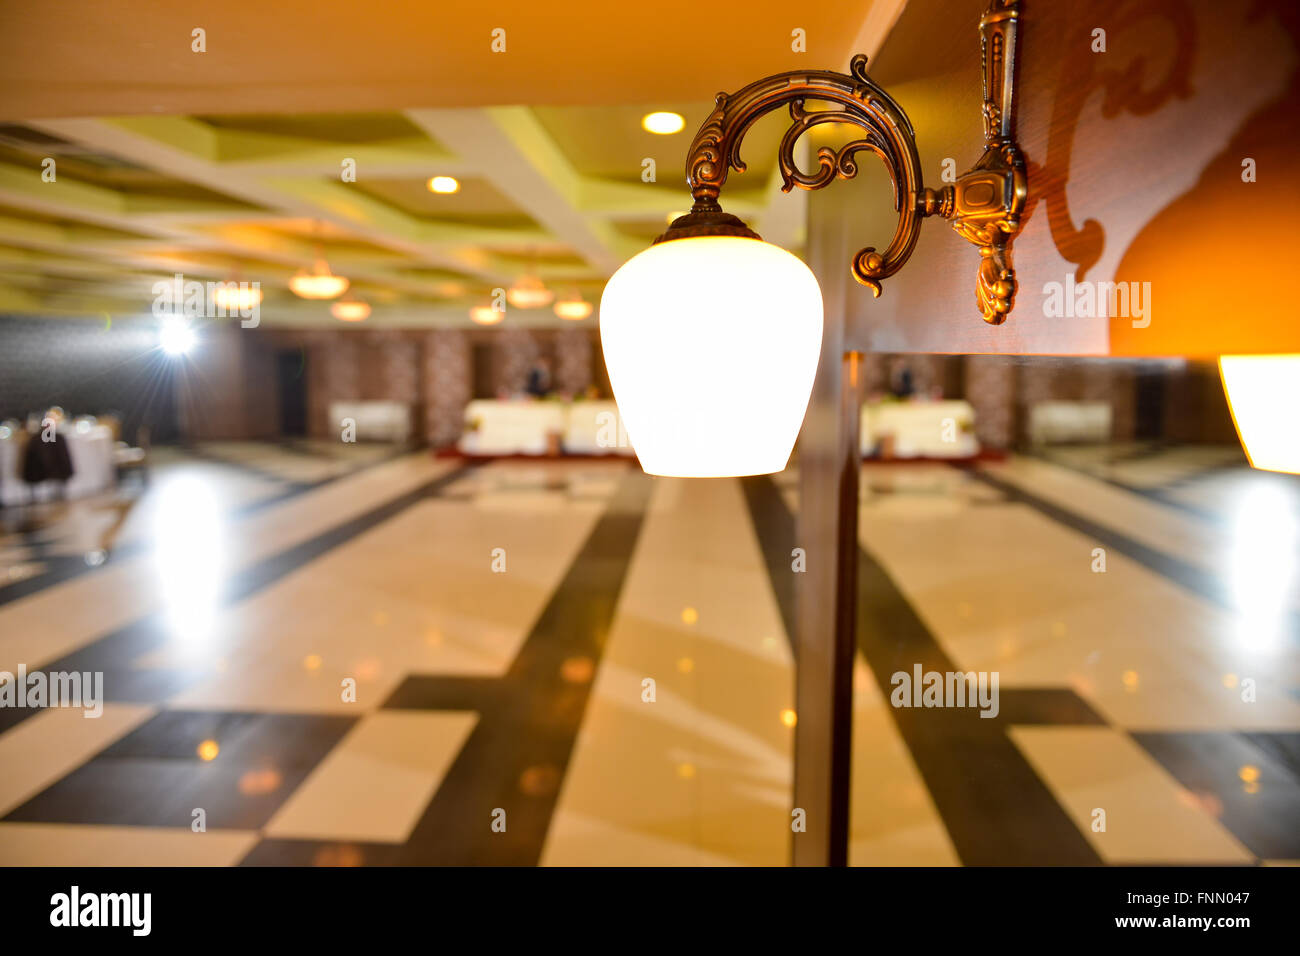 Lamp hanged on a wall in restaurant Stock Photo